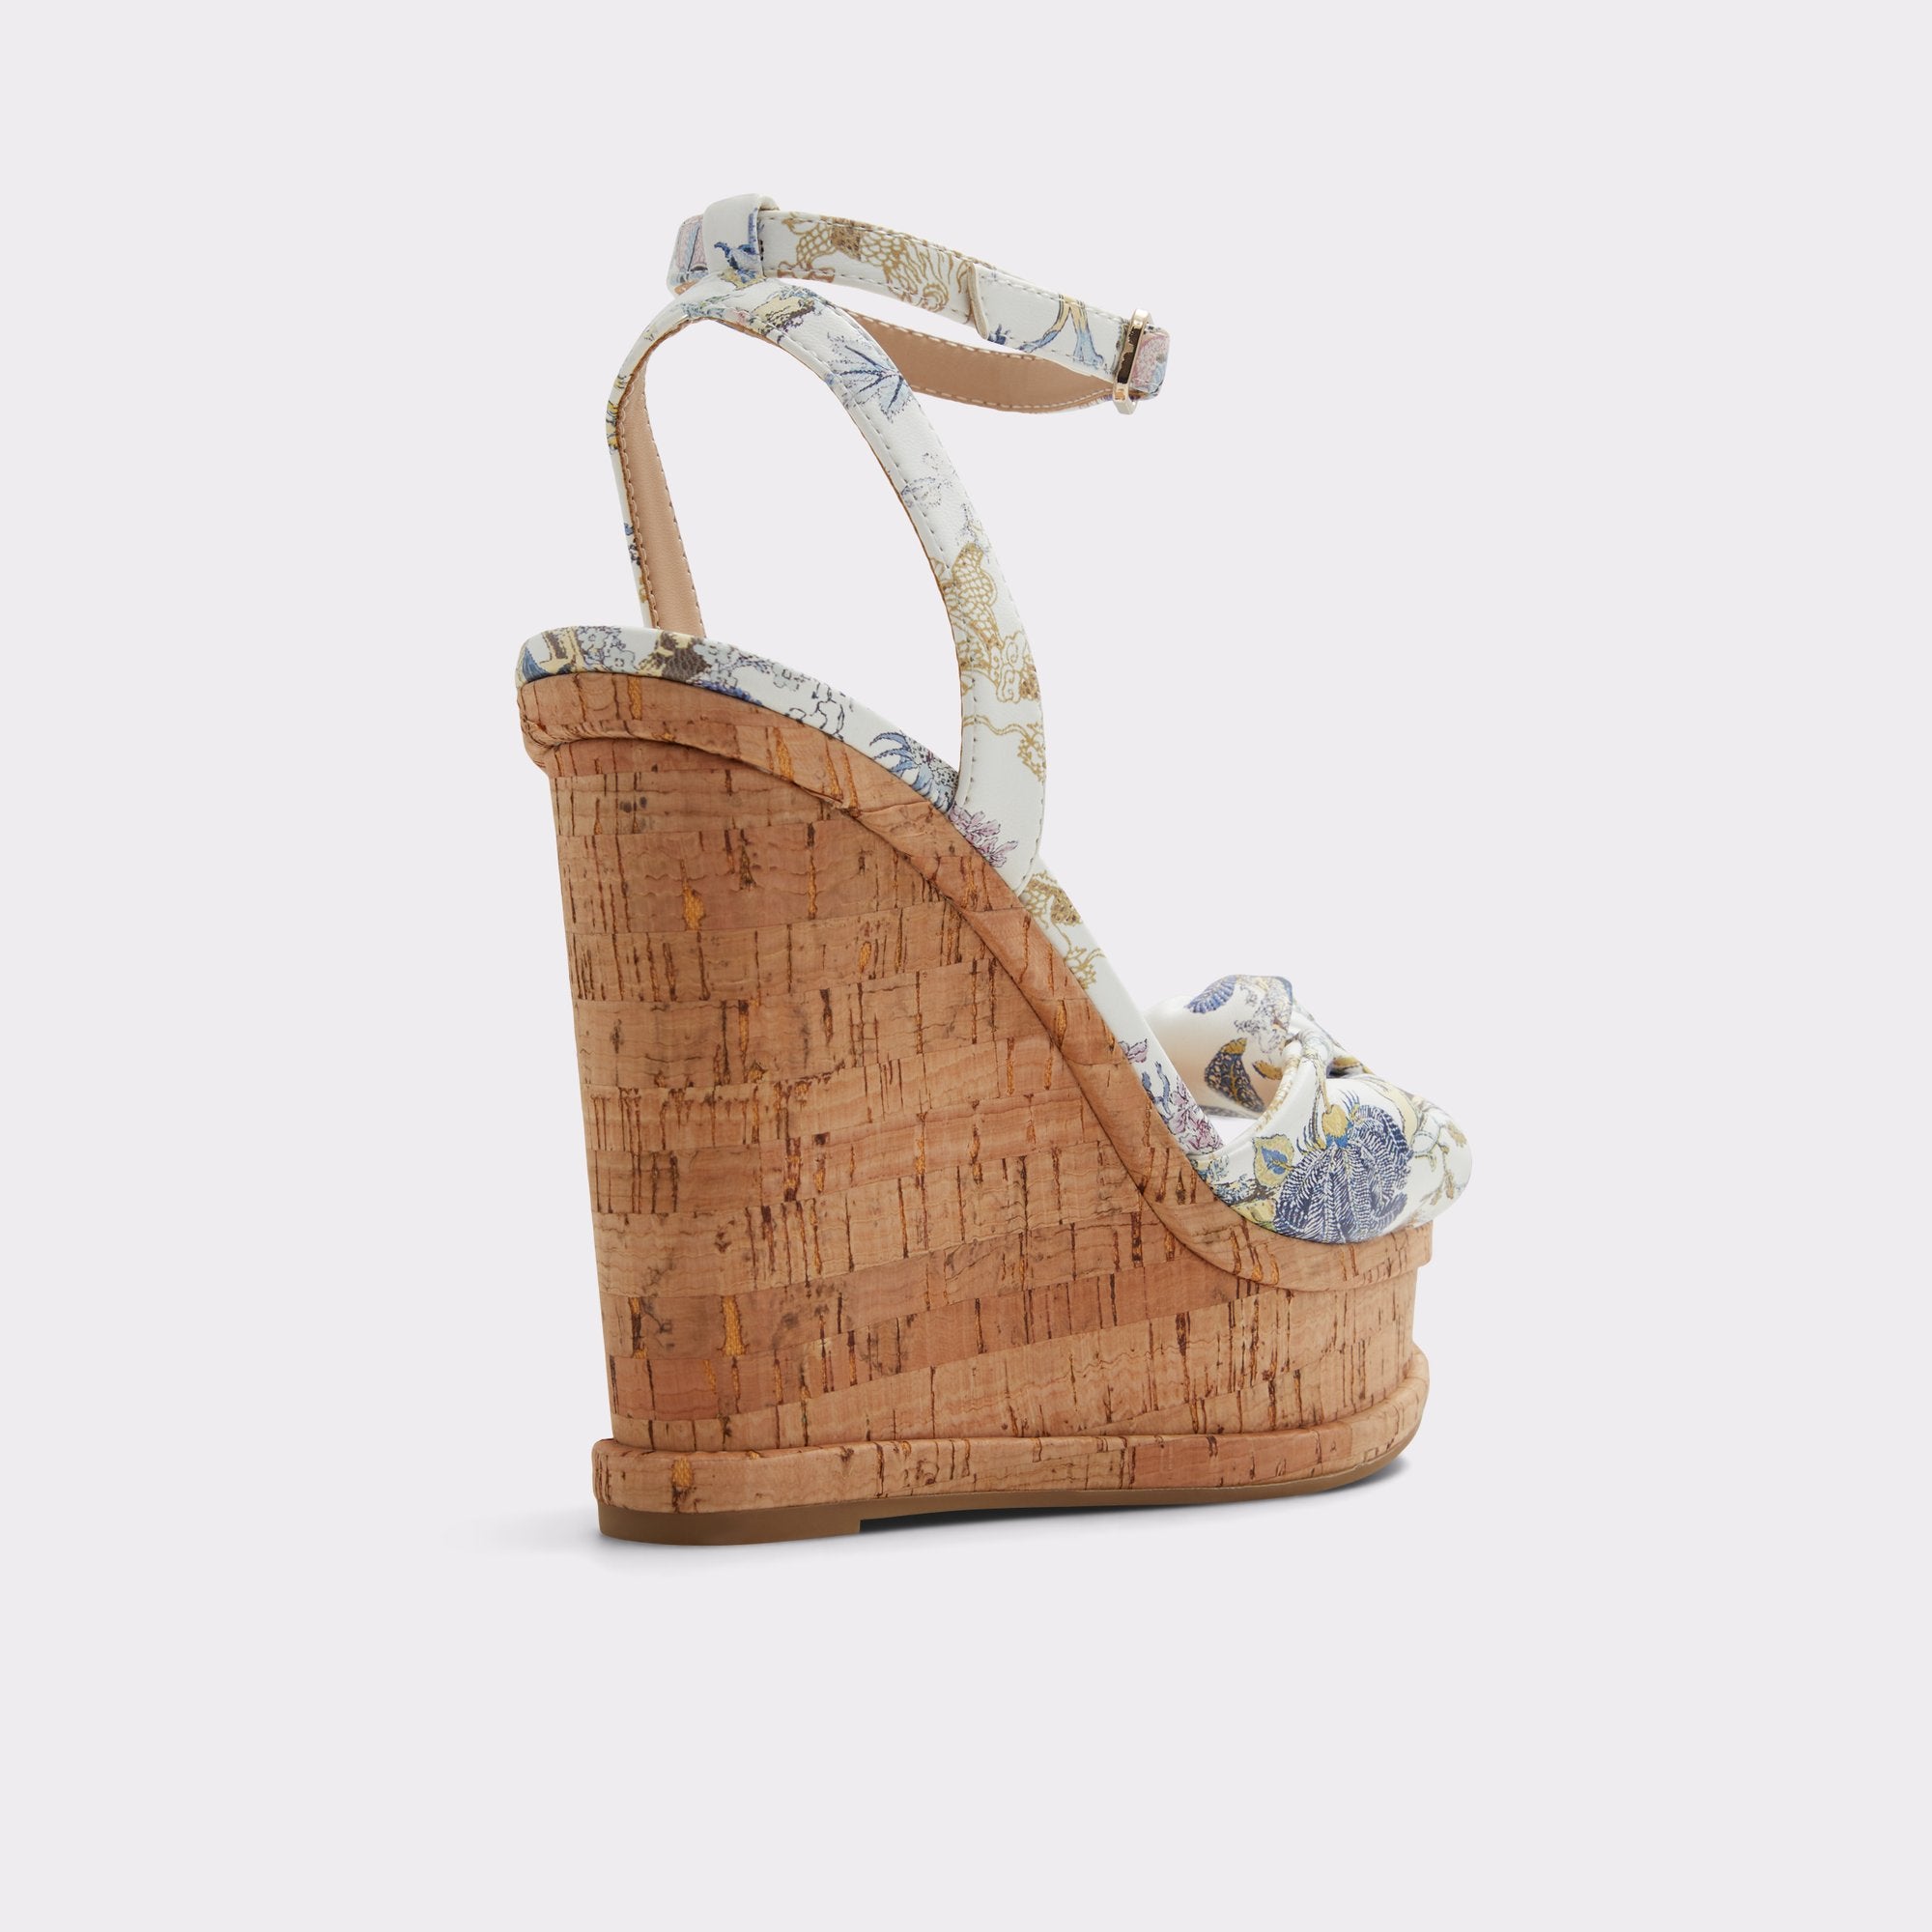 ALDO LEATHER KNOT WEDGE SANDAL IN WHITE